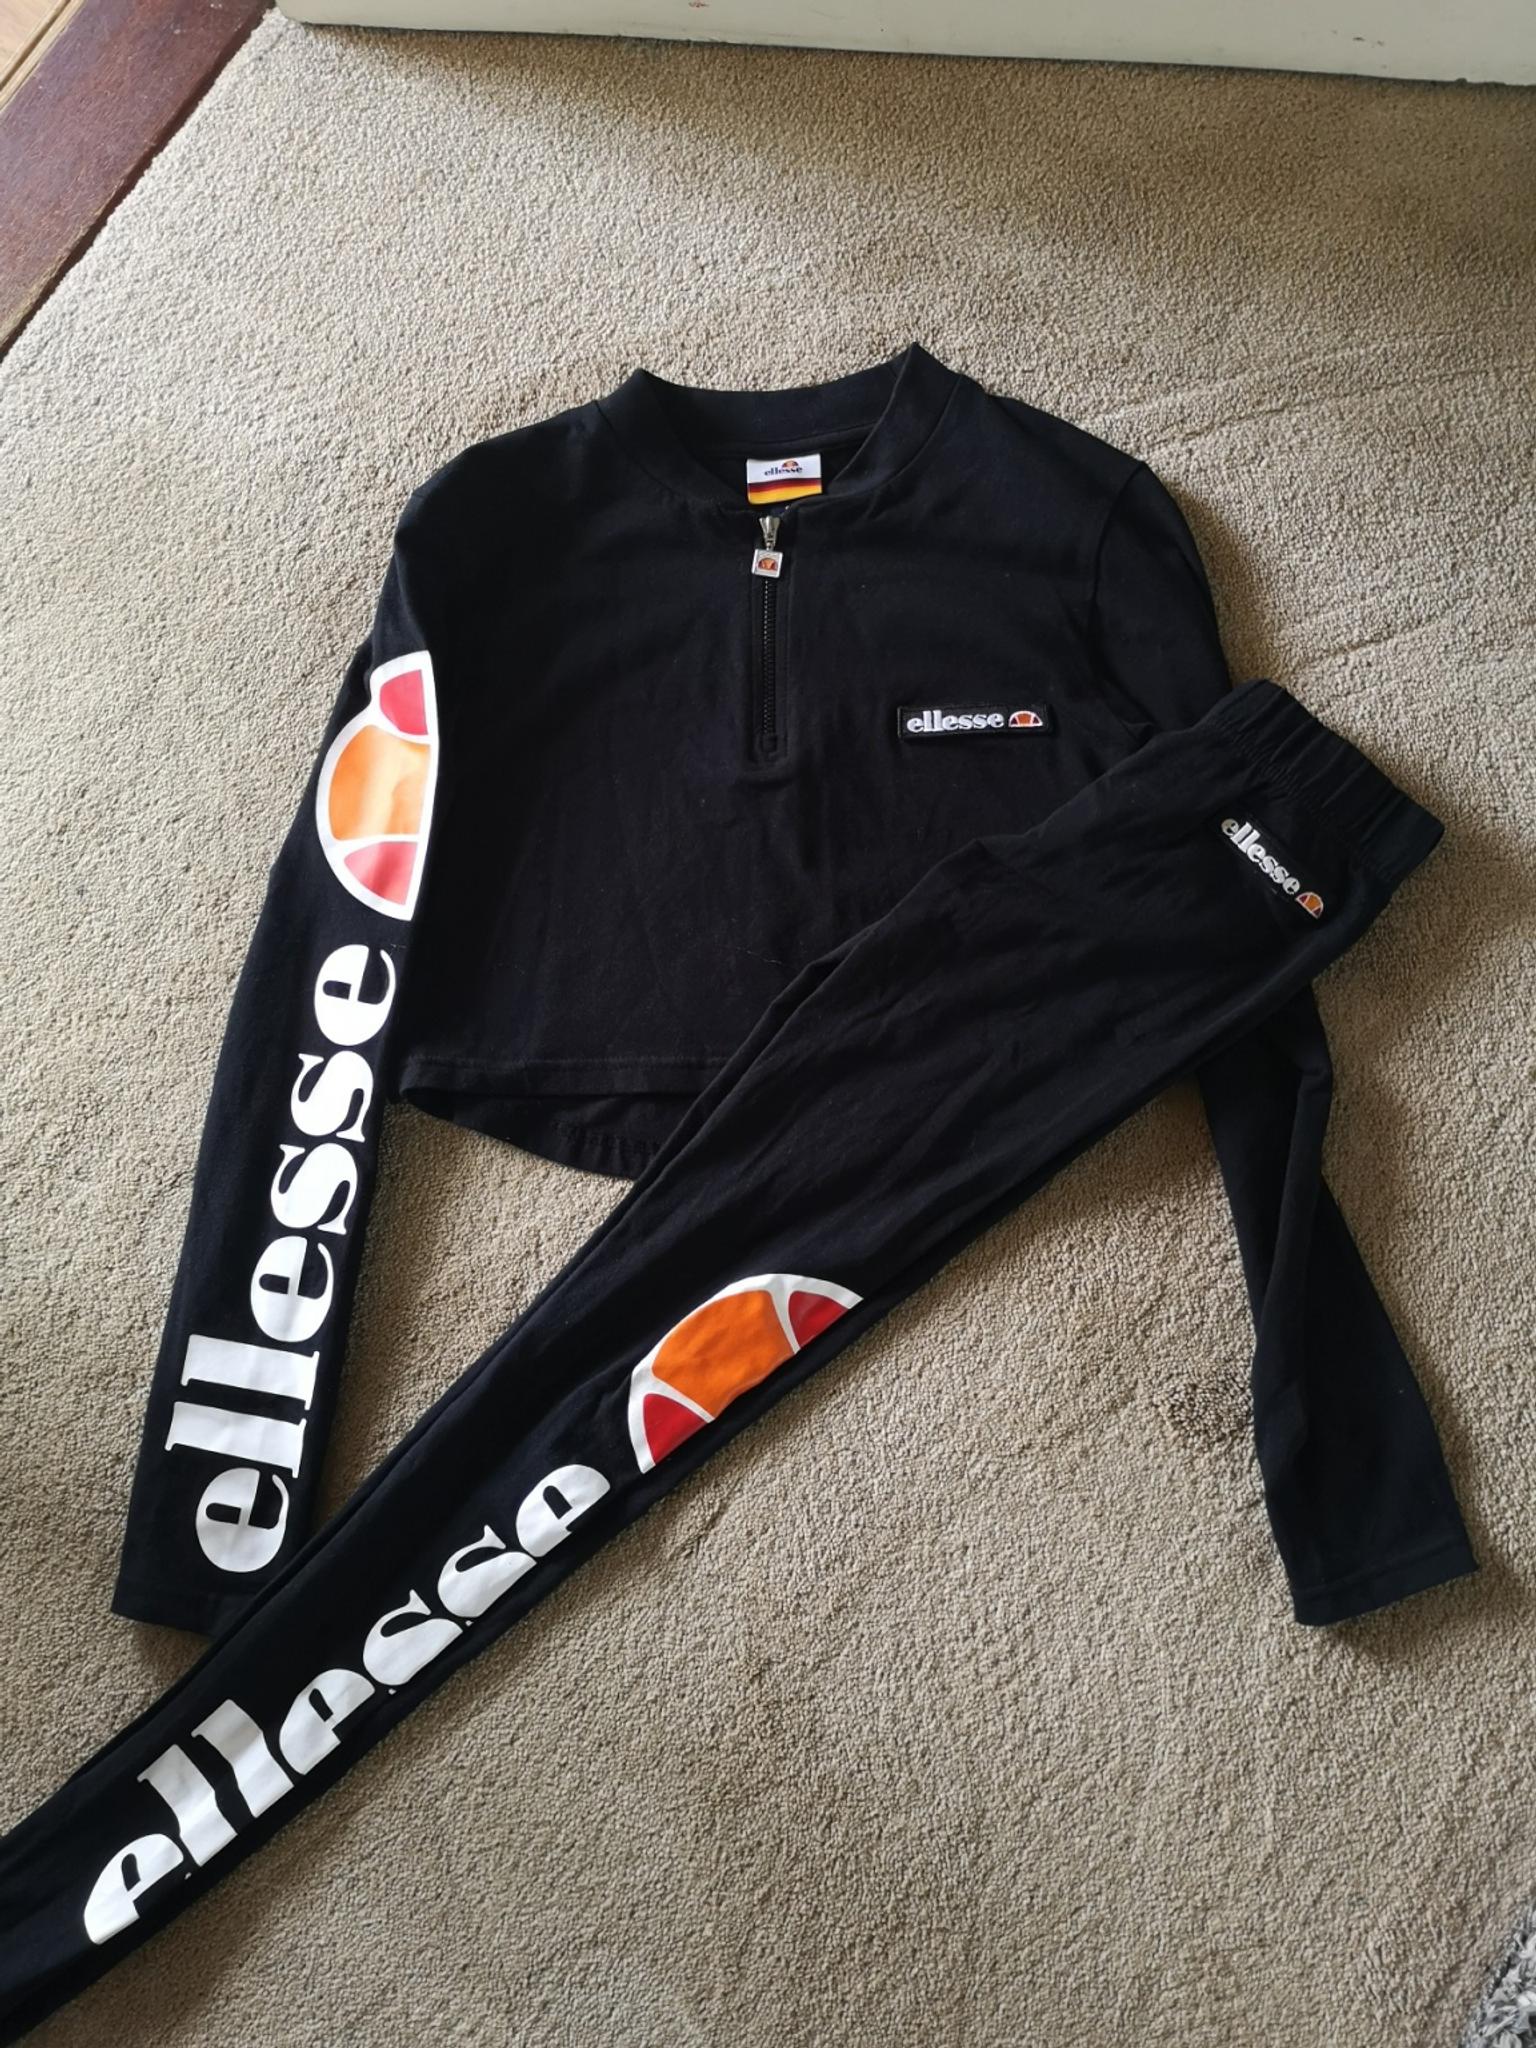 ellesse outfit